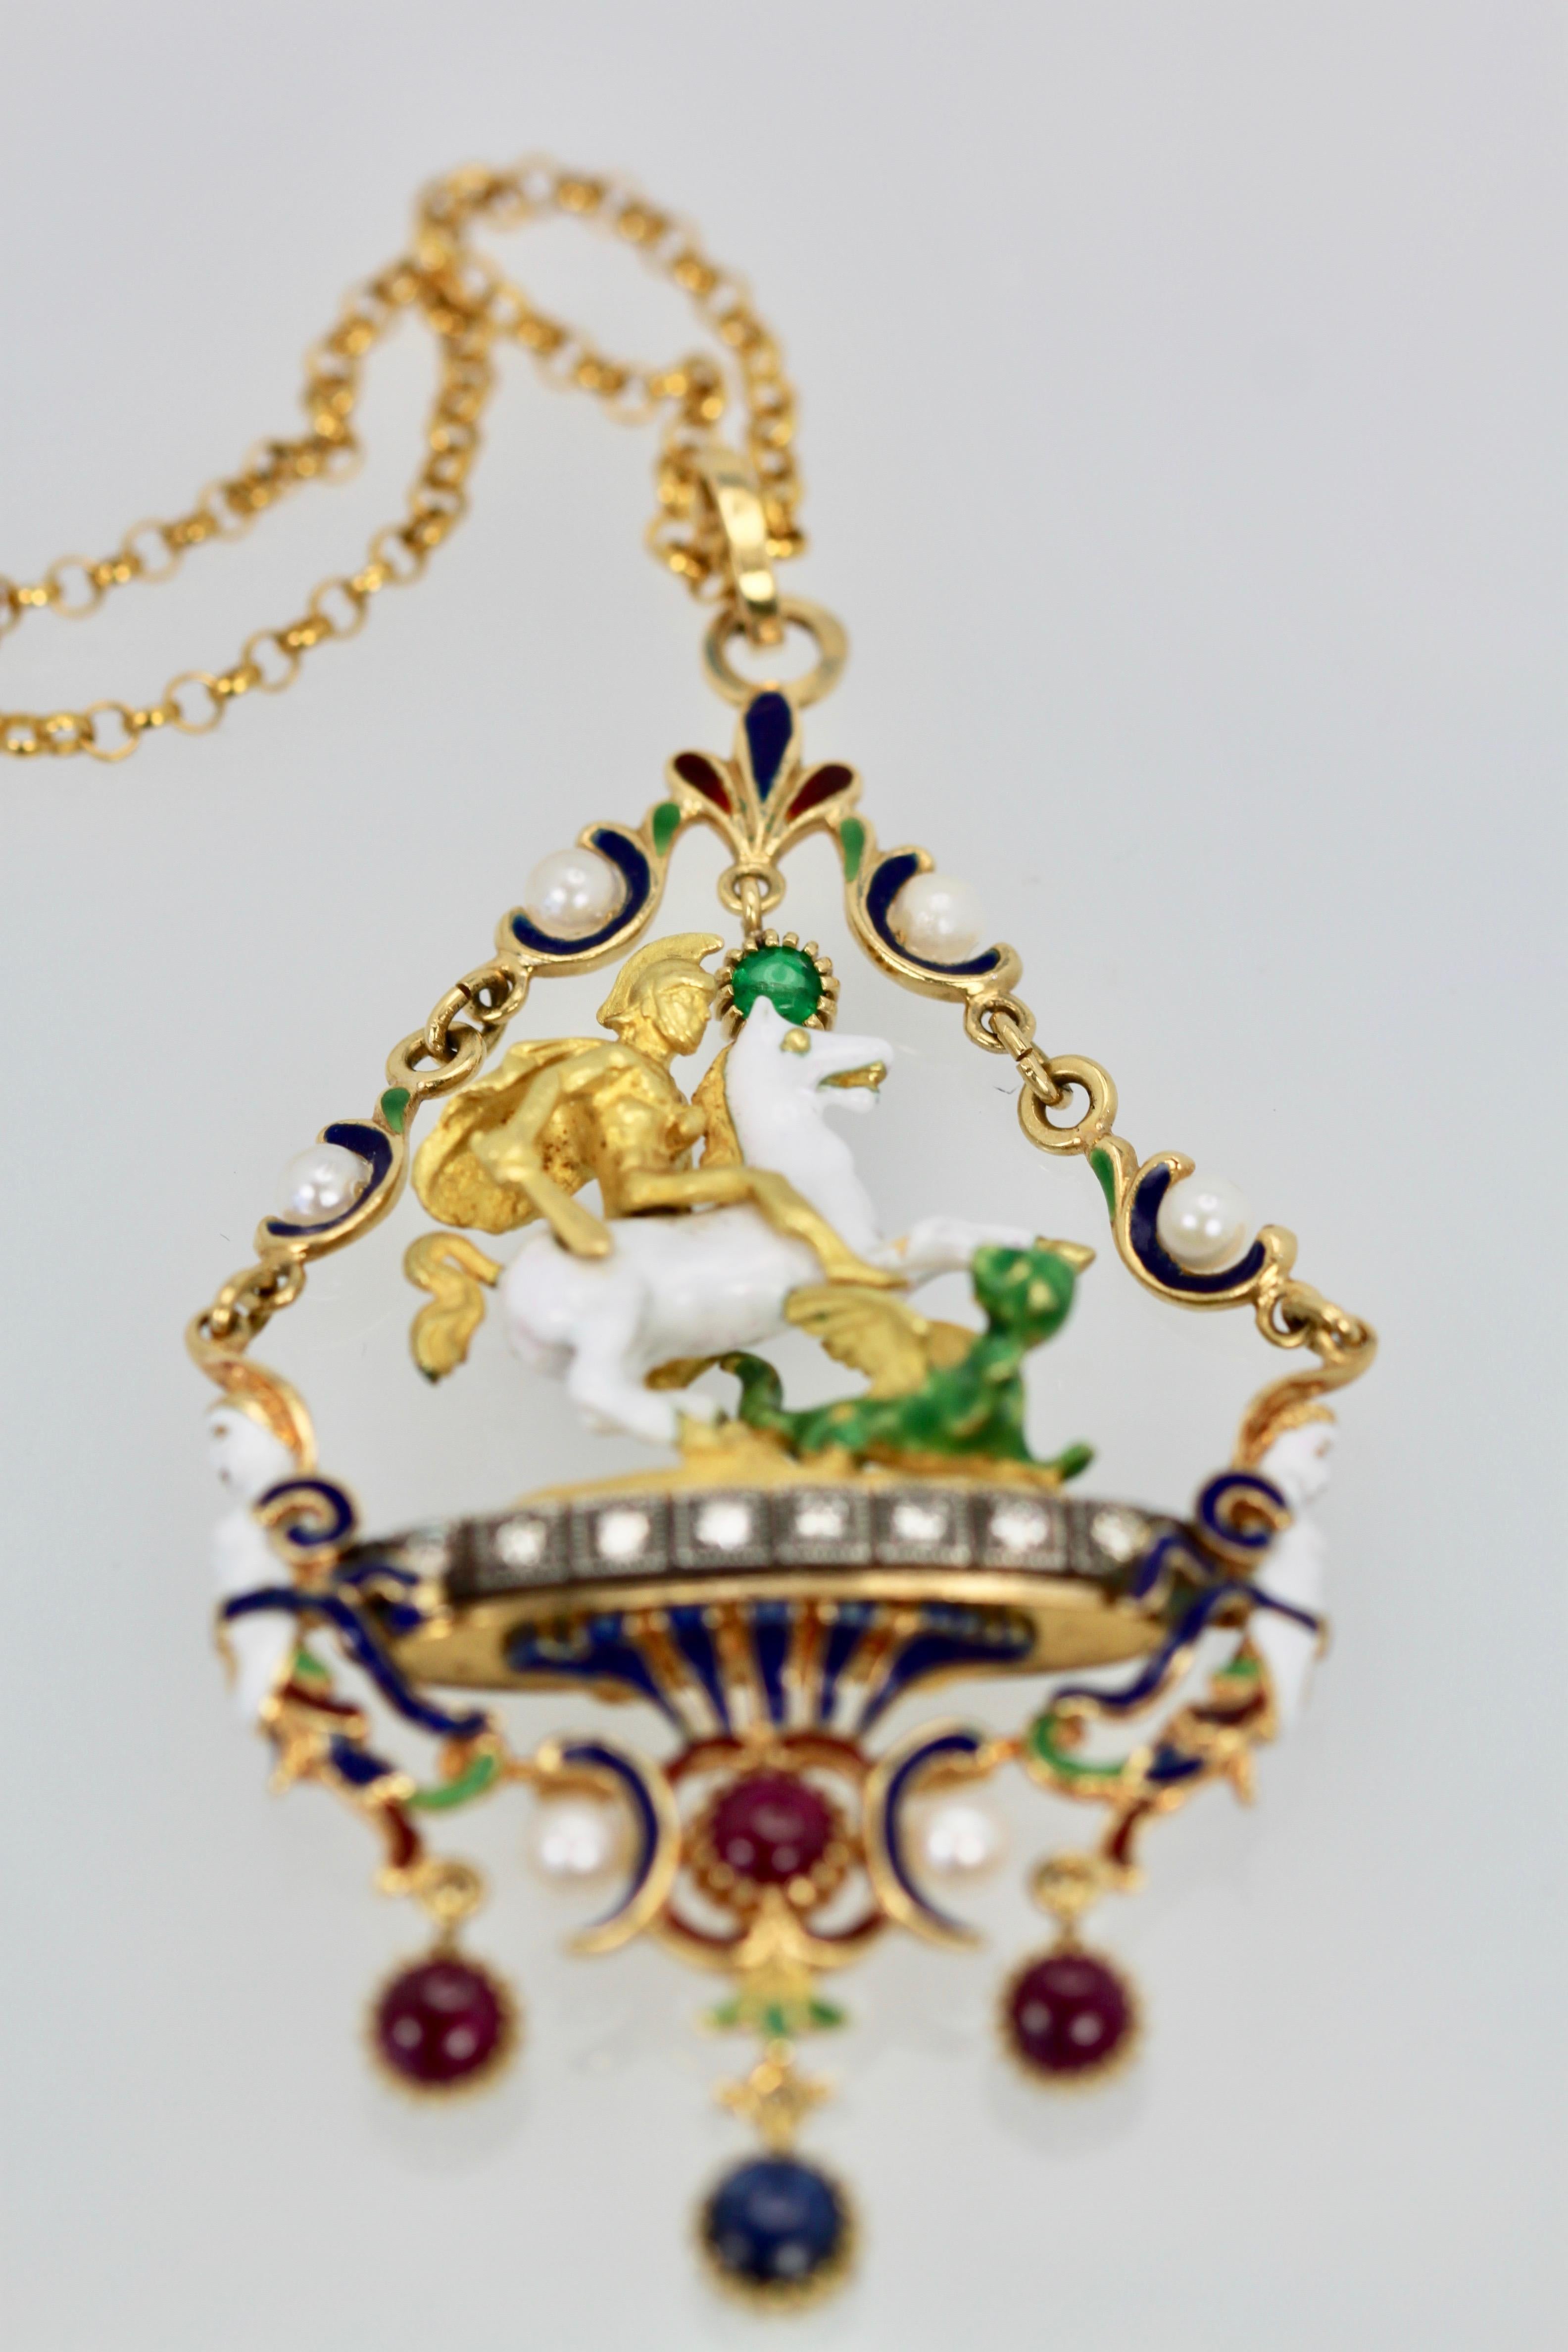 This Saint George Slaying the Dragon Pendant is in 18K Yellow Gold with enamel and gemstones is spectacular.  There are many of these pendants in silver and base metal but seldom do you find one in 18K Gold.  This one is almost perfect just a bit of